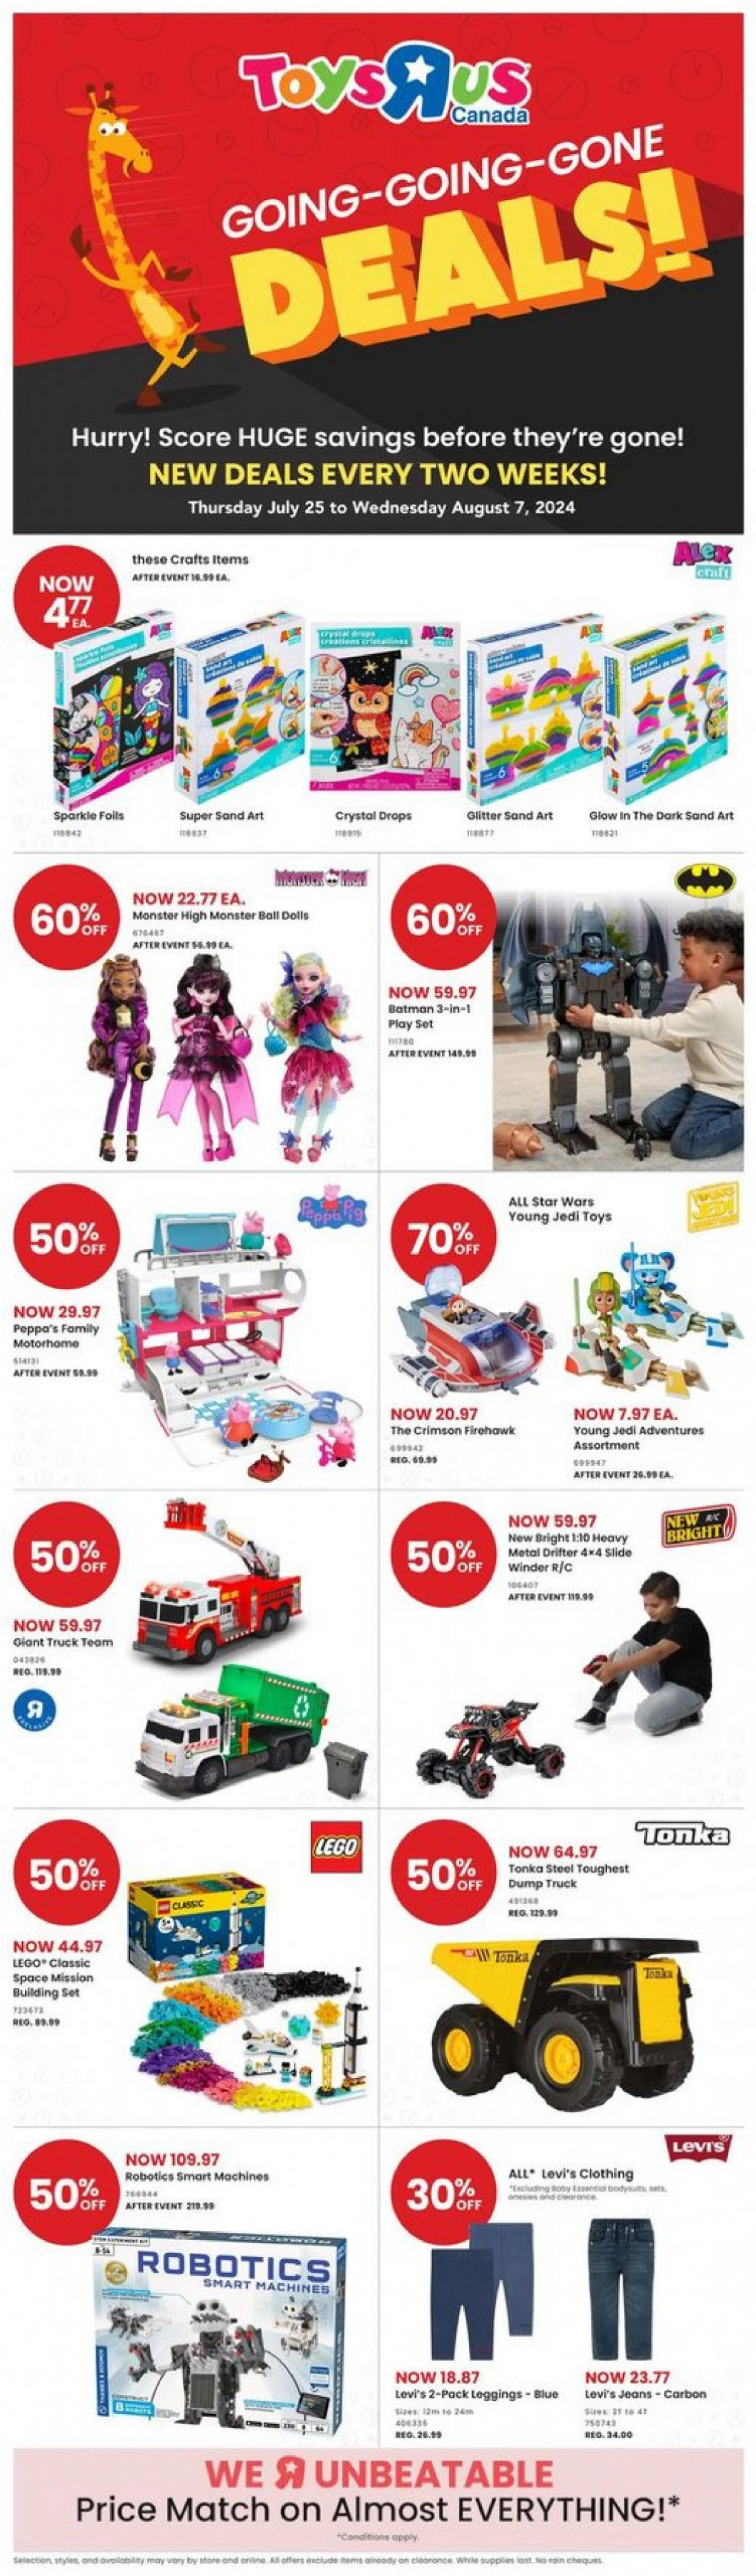 toys-r-us - Toysrus flyer current 25.07. - 07.08.